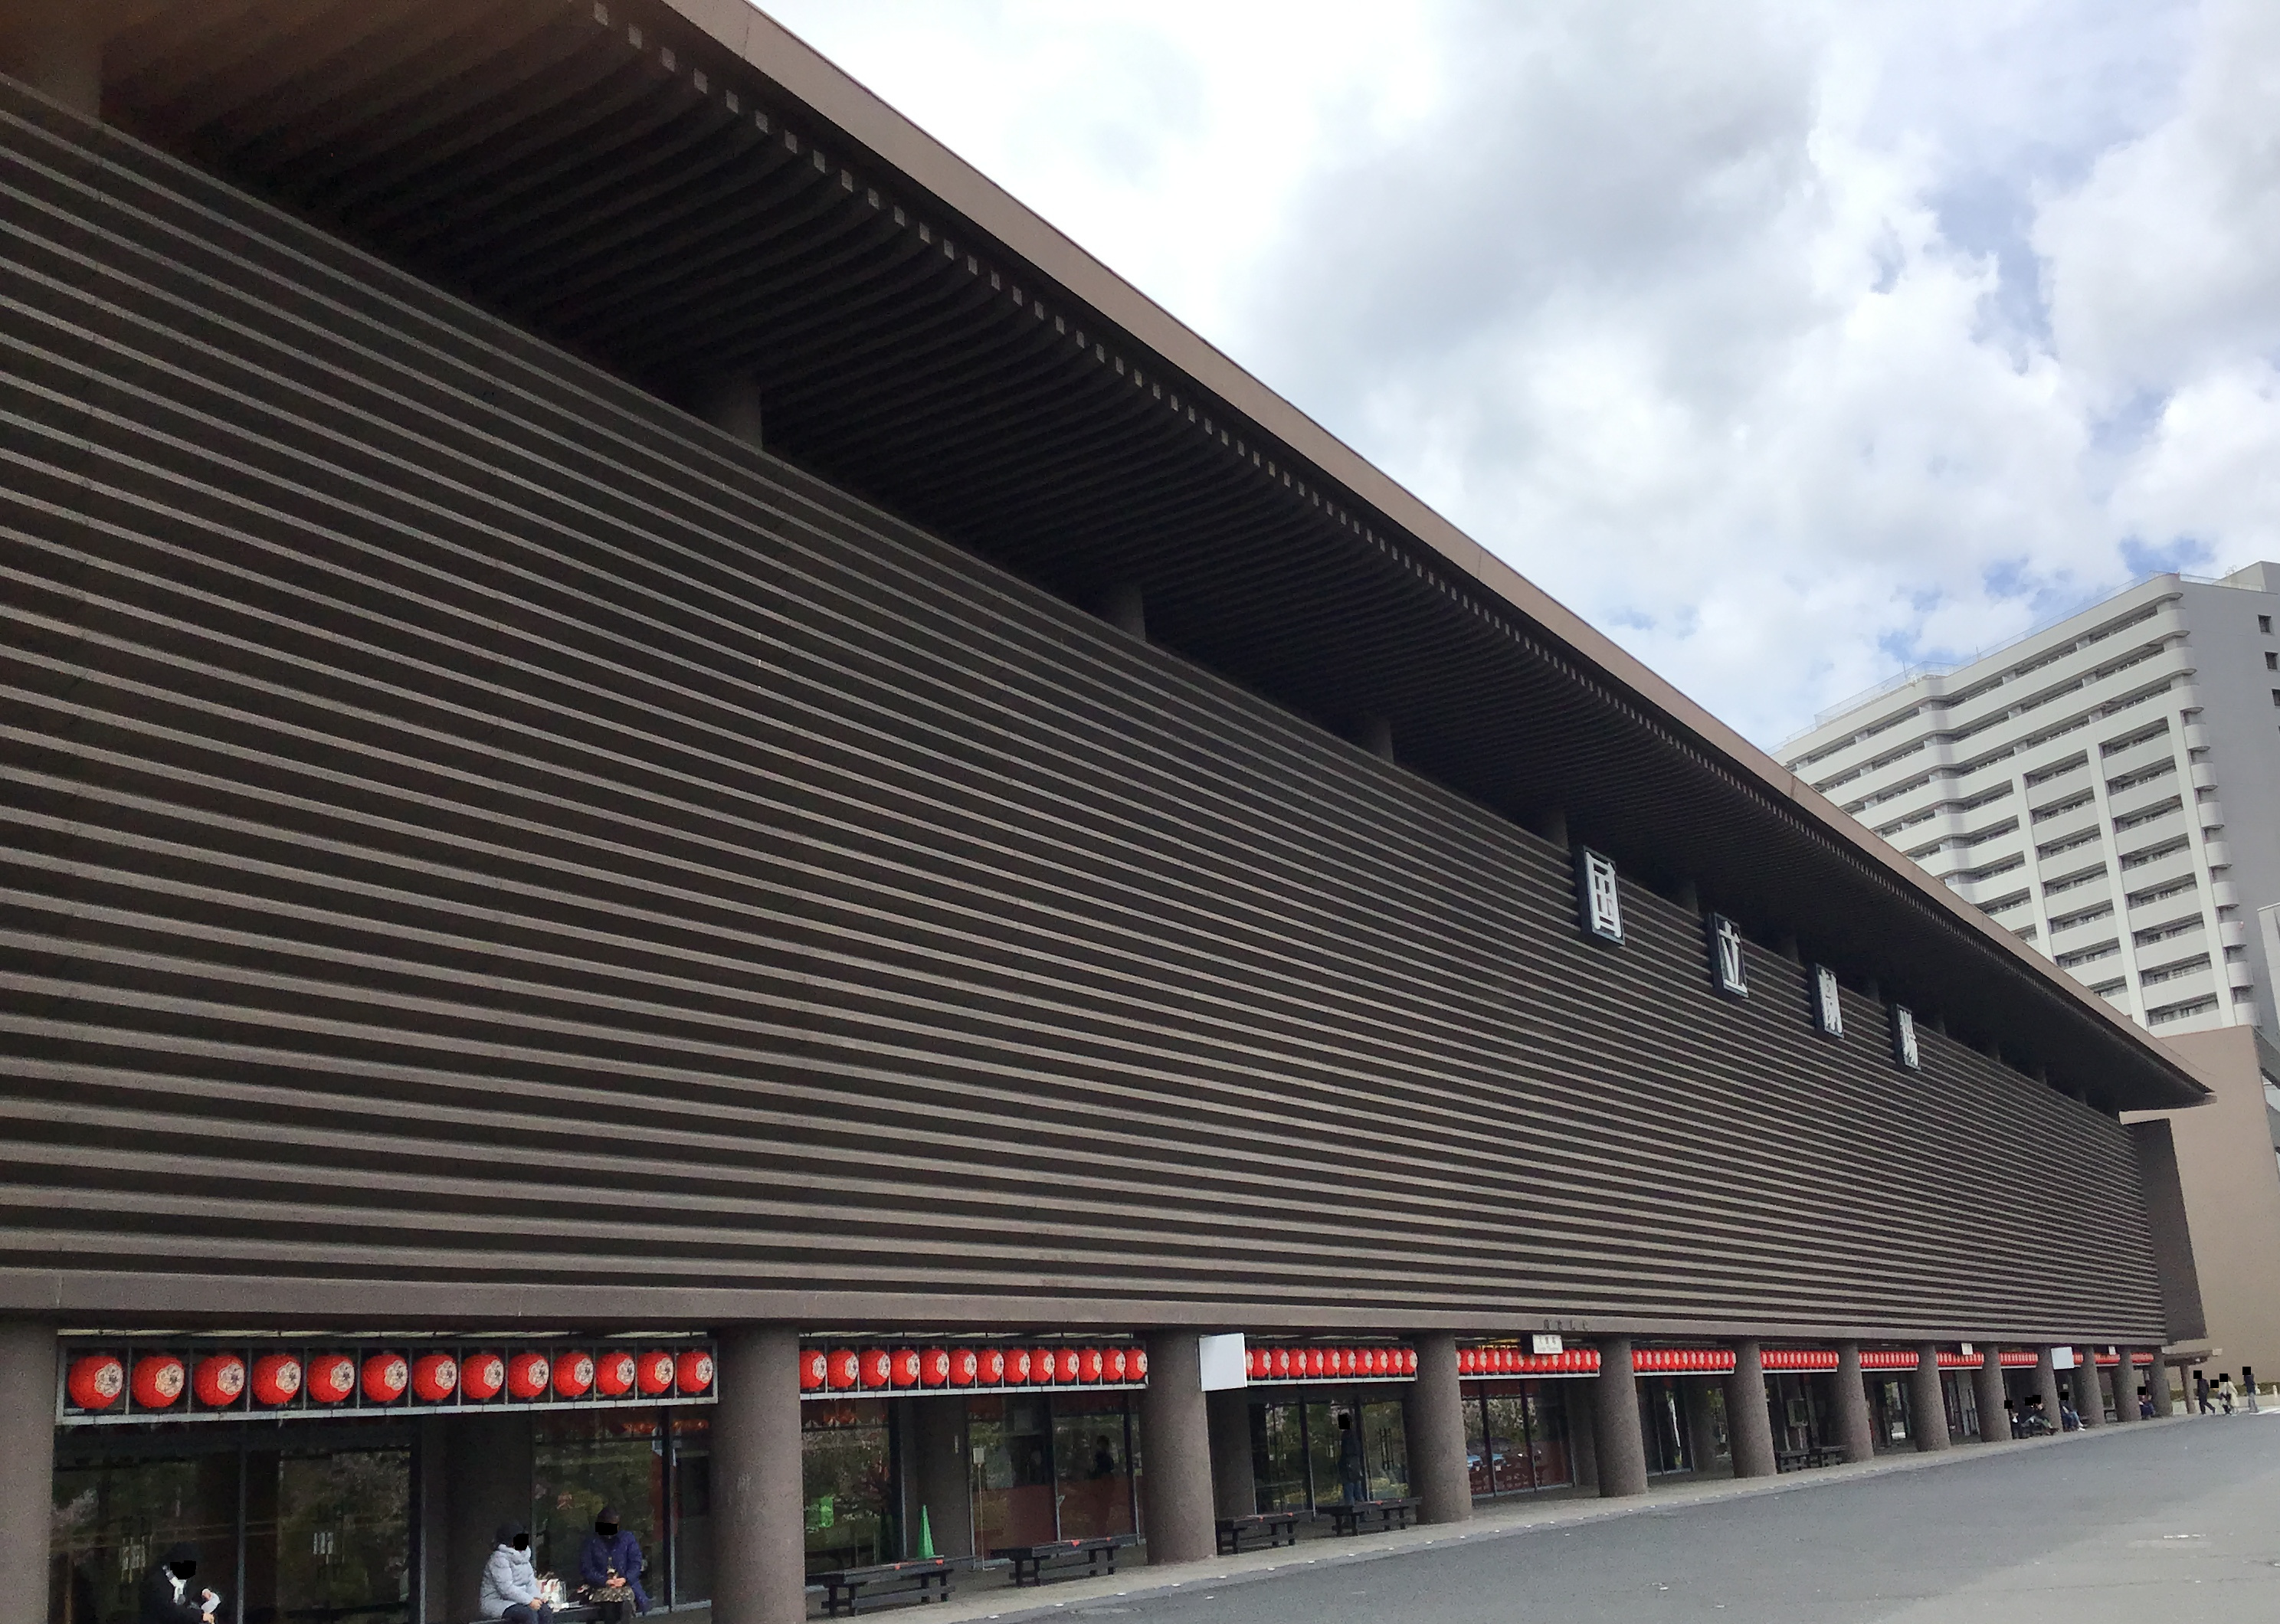 The front of the National Theatre